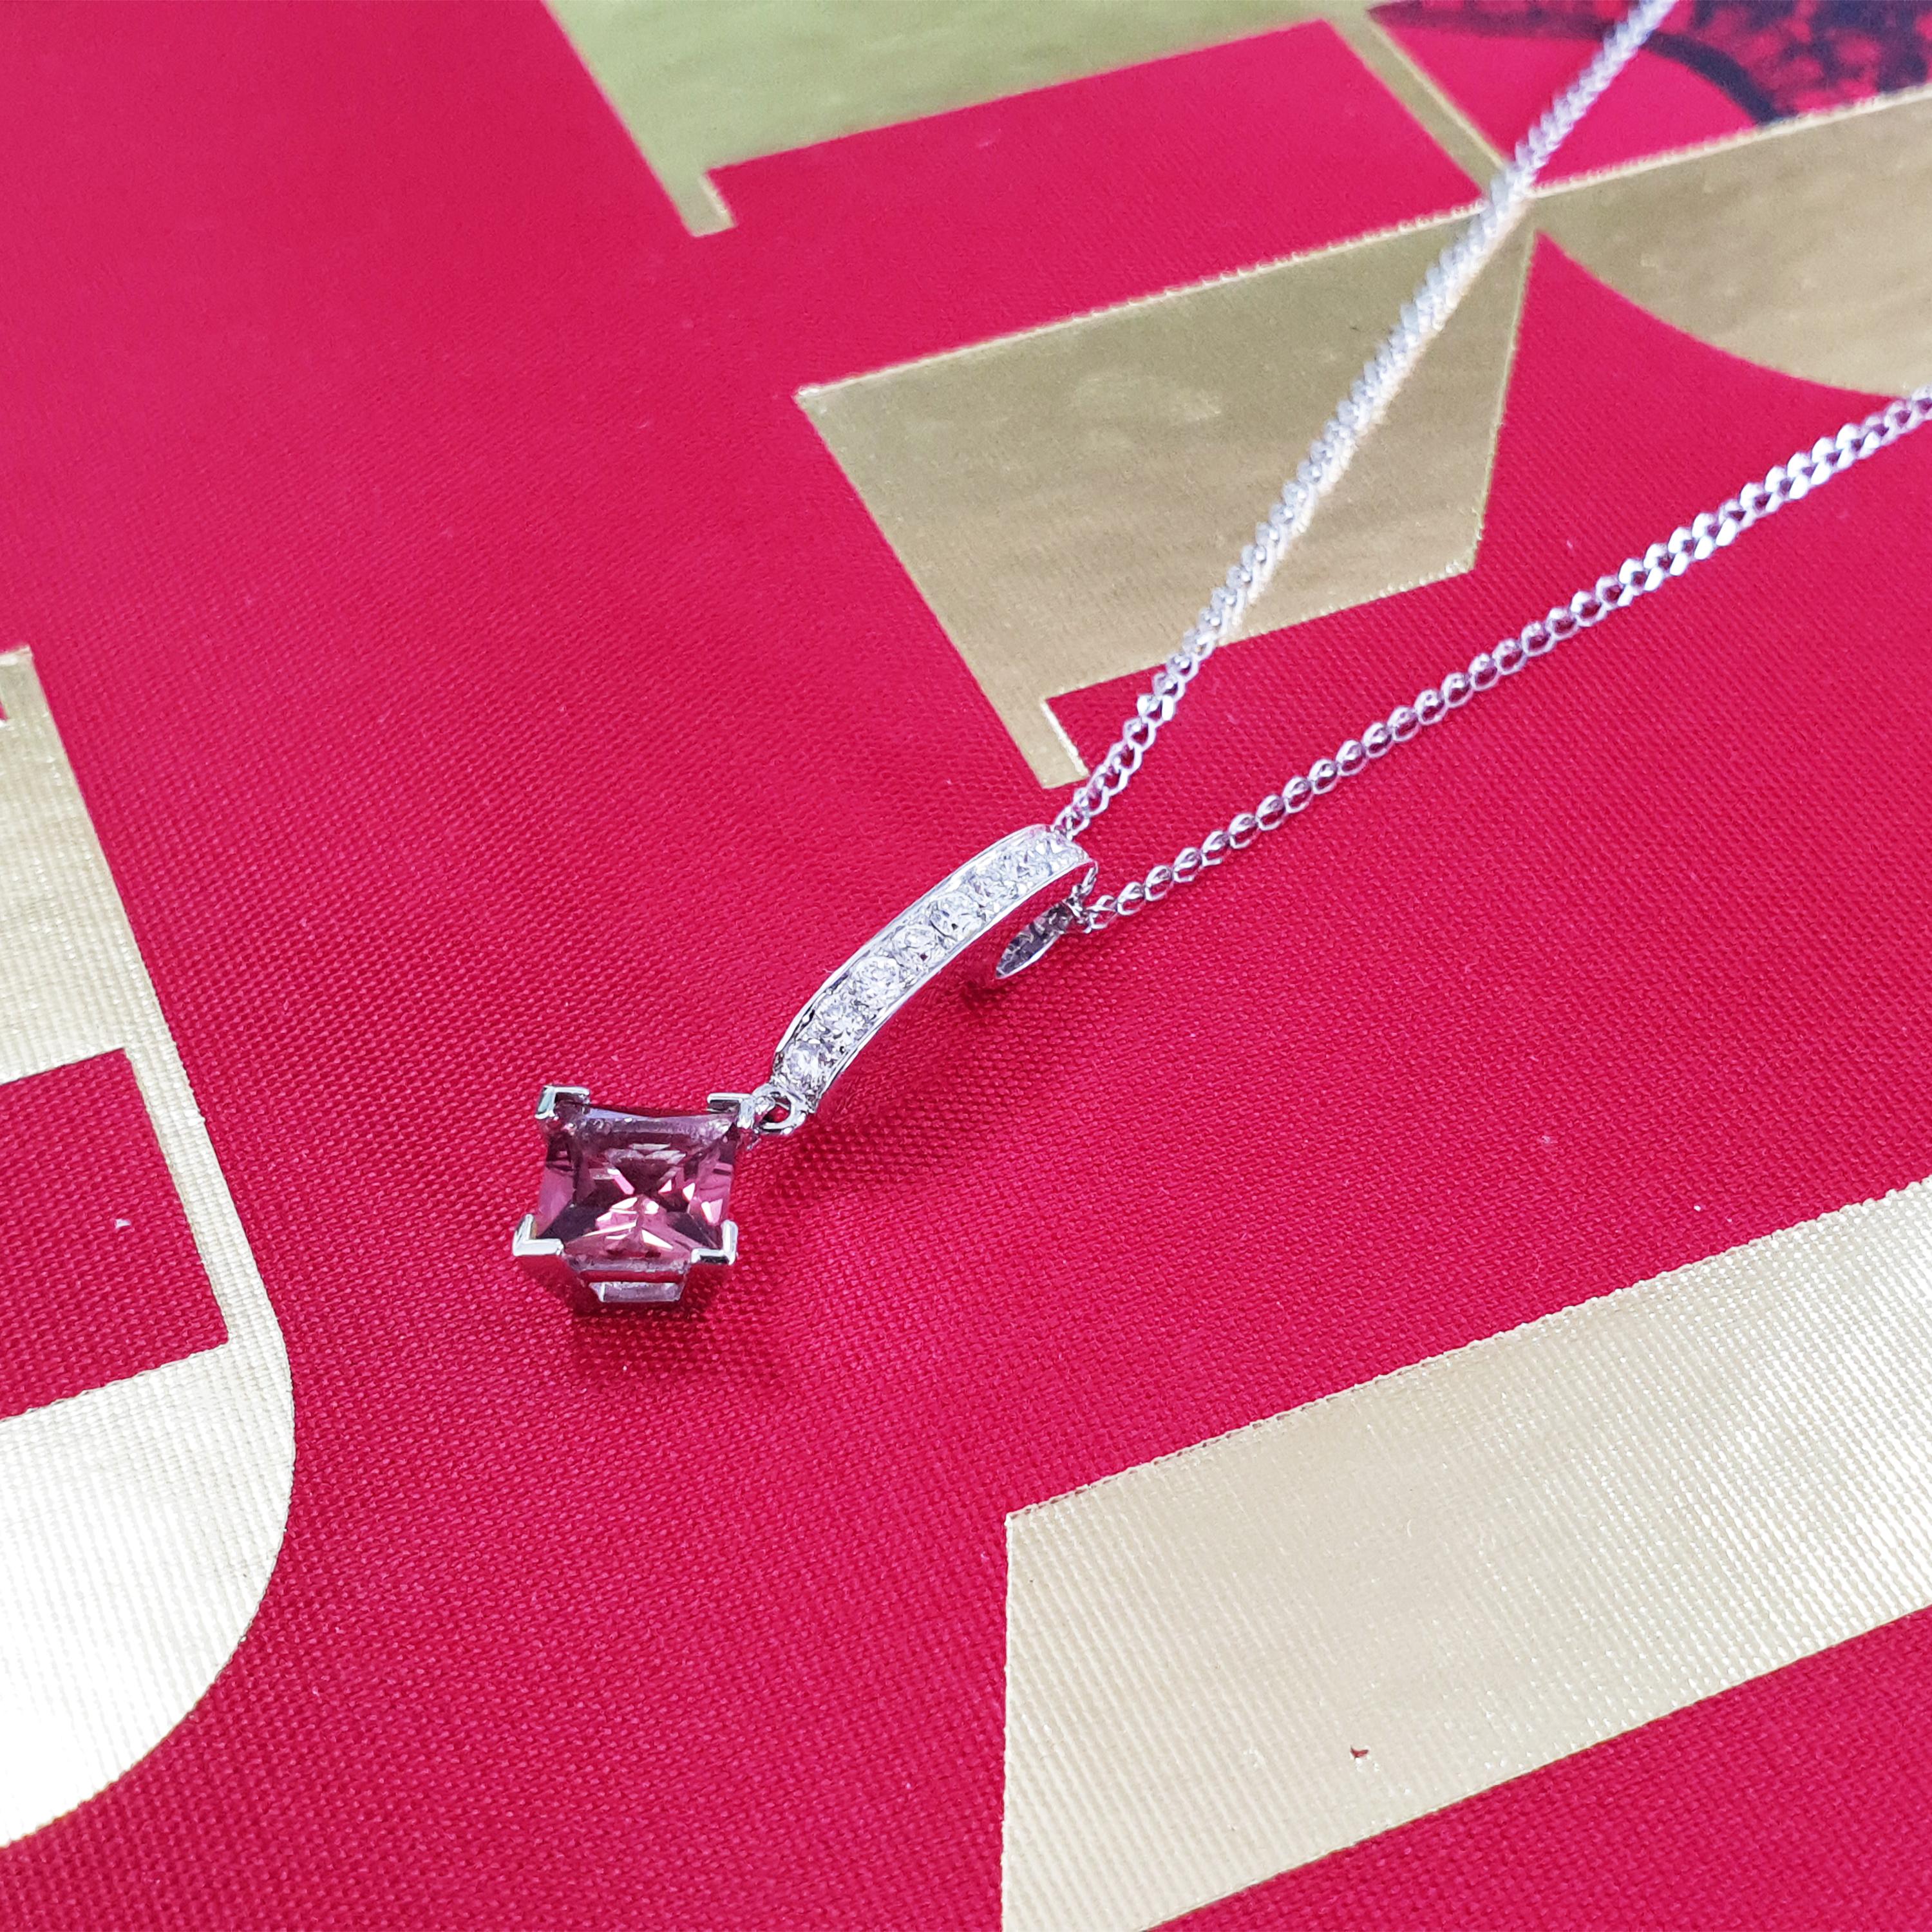 Description:
One-off 18ct white gold pendant by designer Fei Liu, set with a vivid 0.20ct rubellite and shimmering diamonds with a total weight of 0.30ct. Chain length is 16 inches.

Our rubellite pendant is an elegant and timeless jewel showcasing